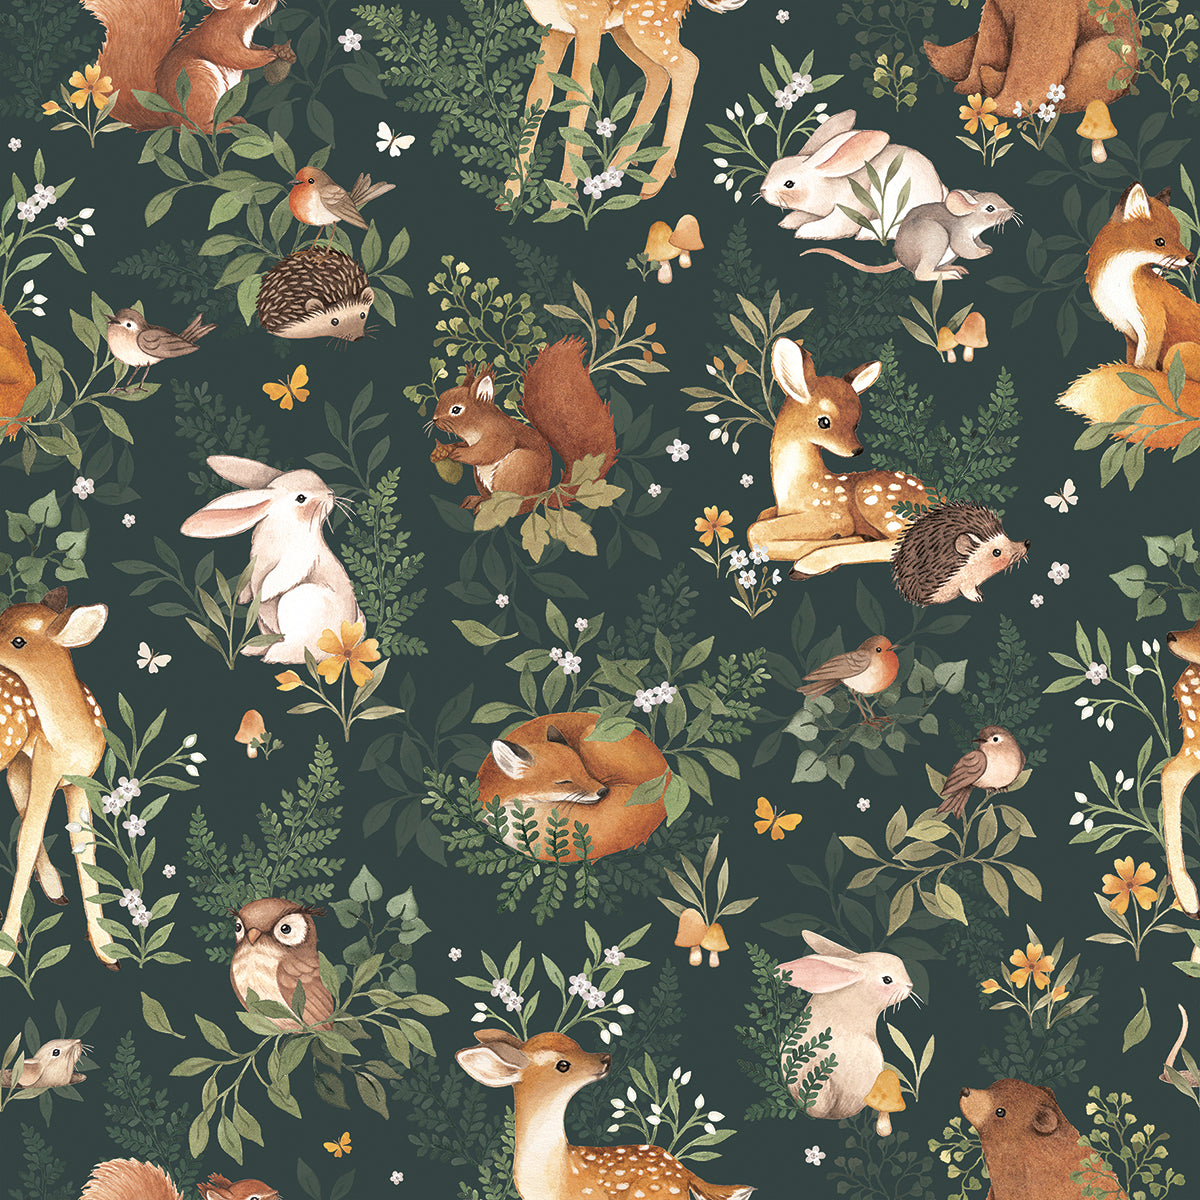 Animals of the wood wallpaper